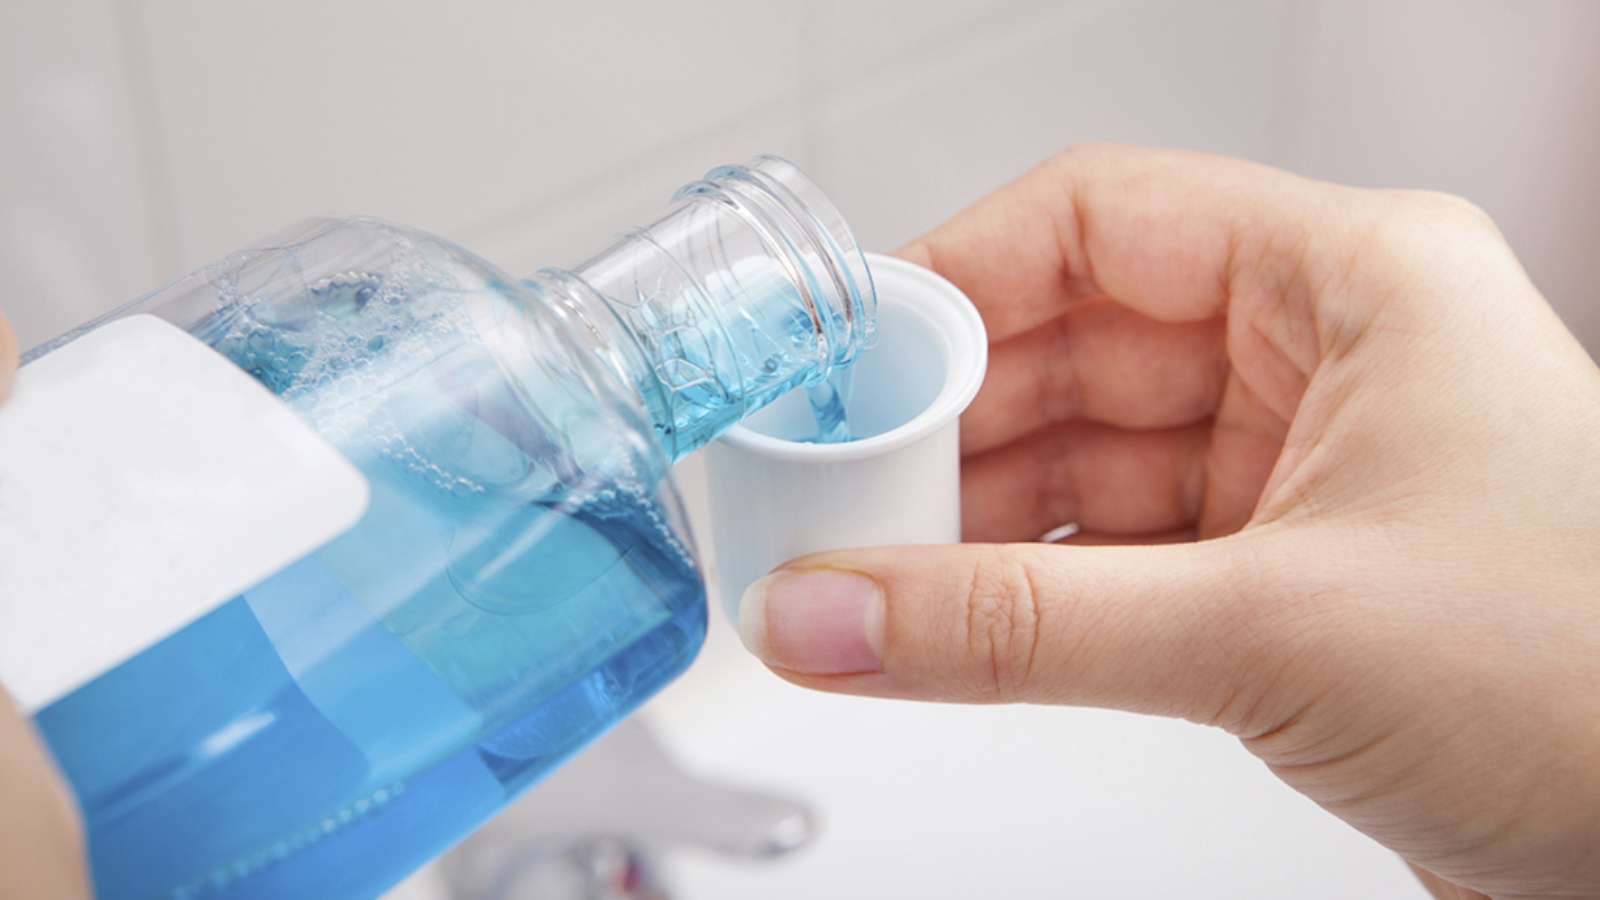 pouring mouthwash into the cap to get rid of bad breath